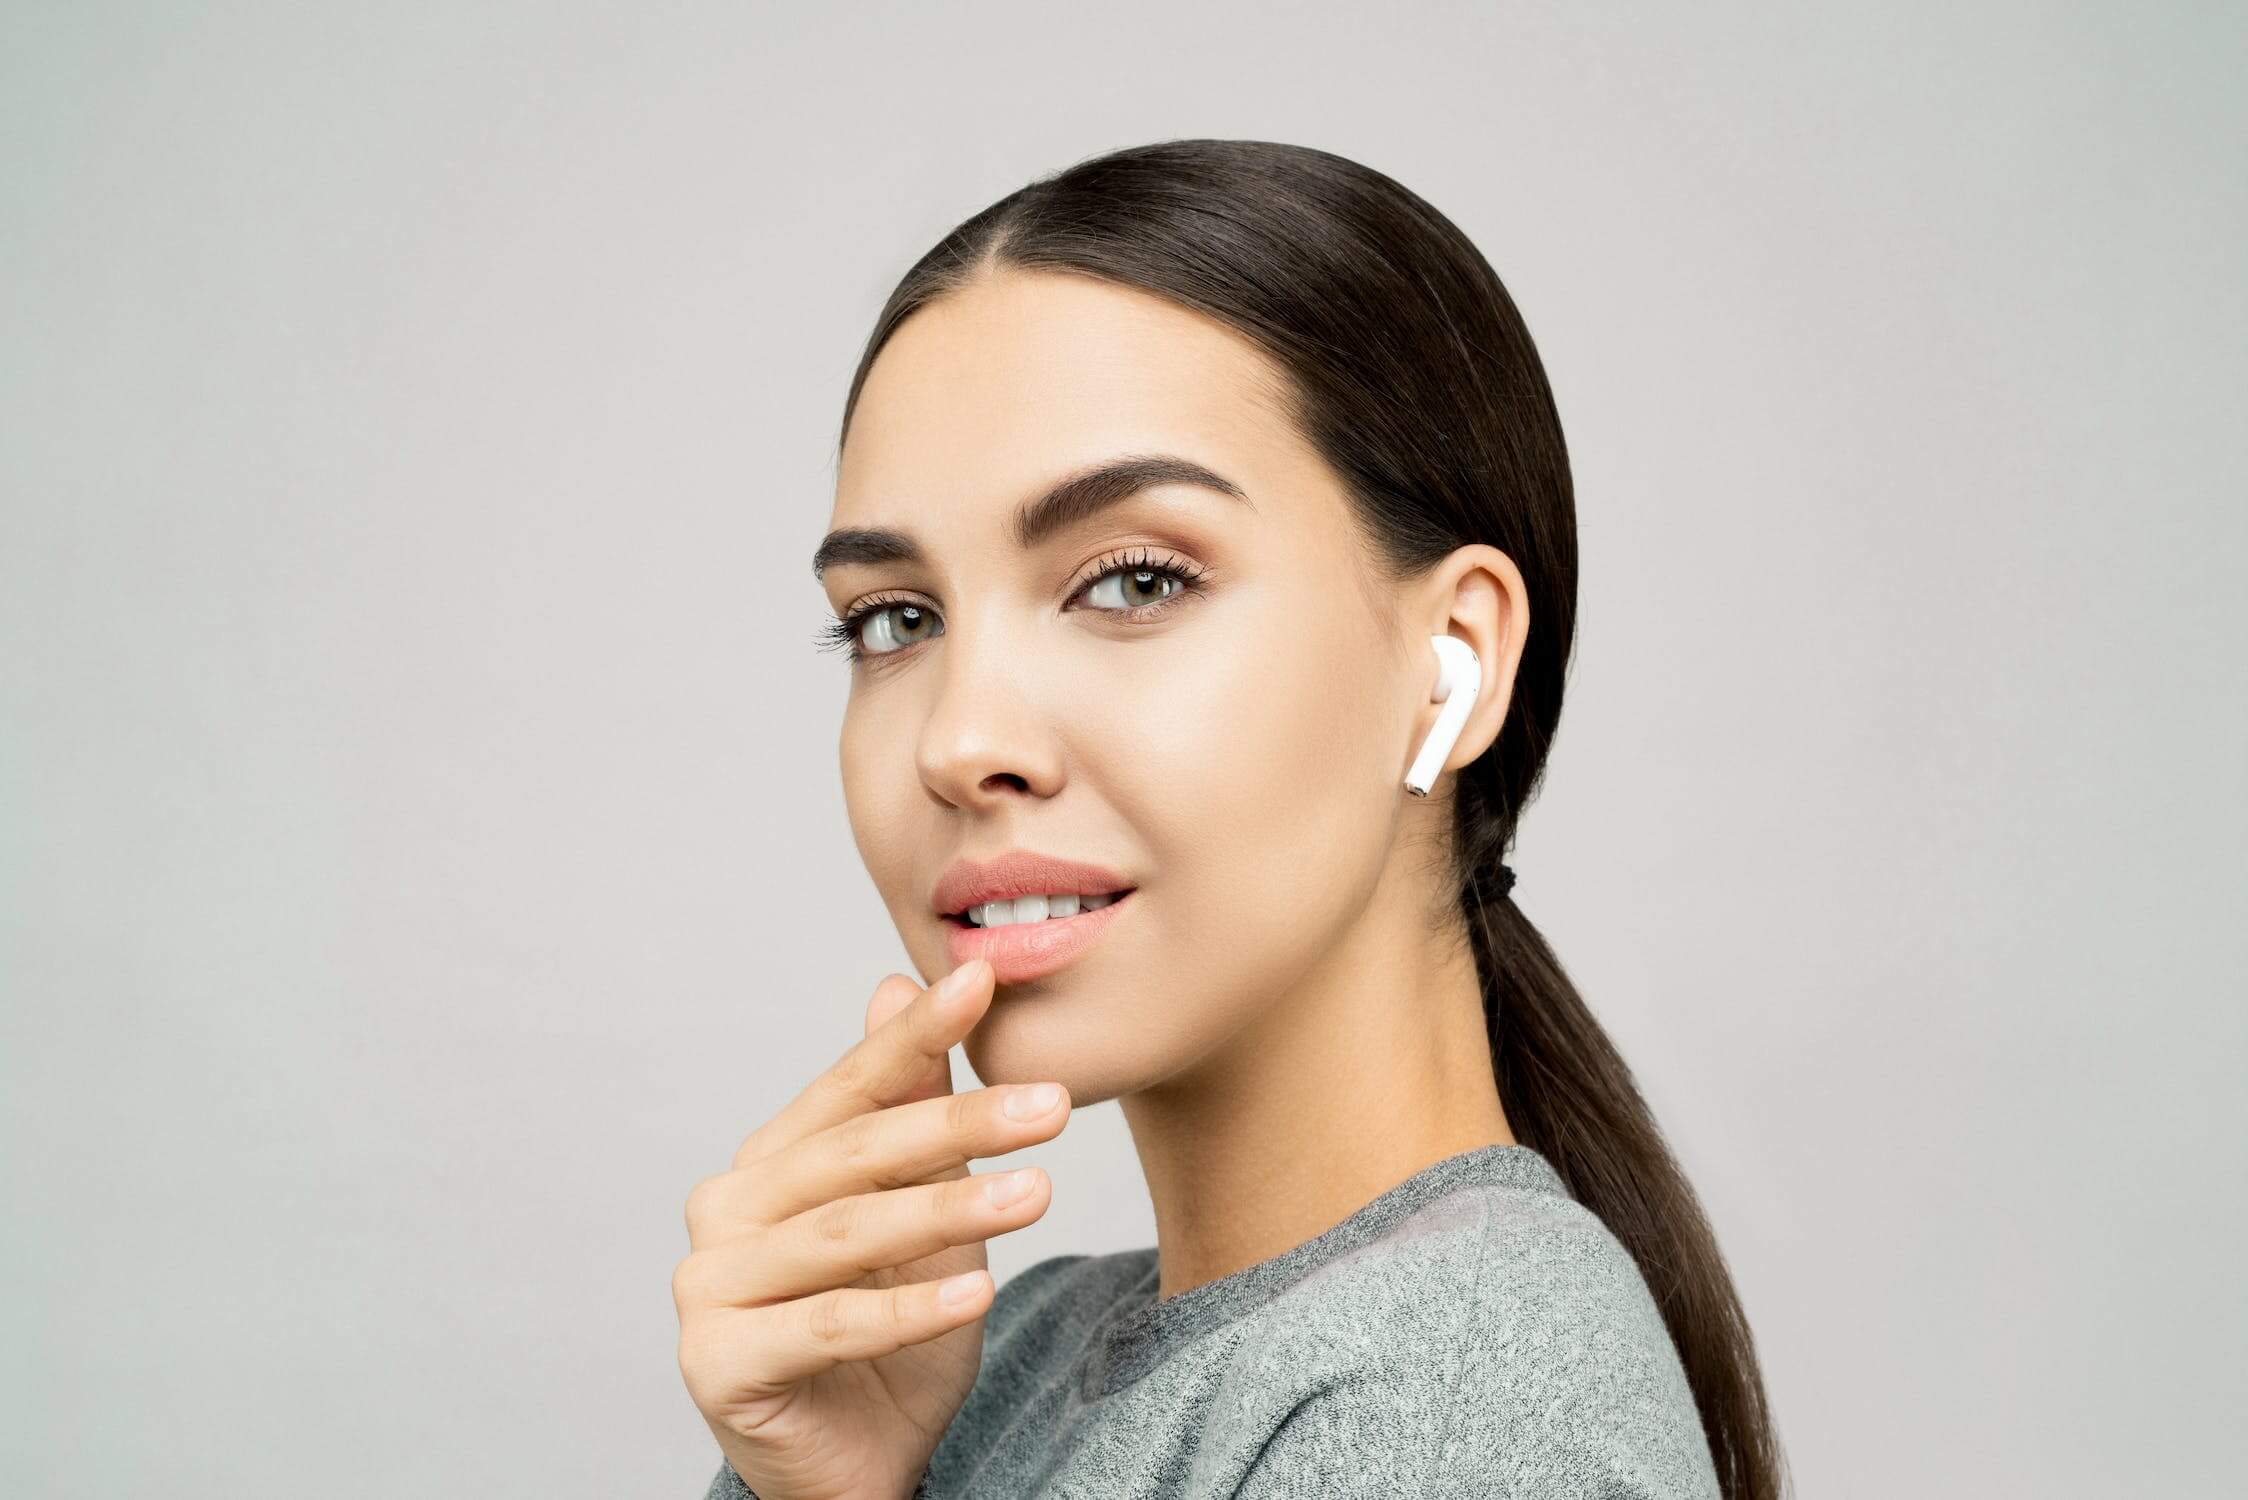 How to Get Rid of Dry Lips During Winter?